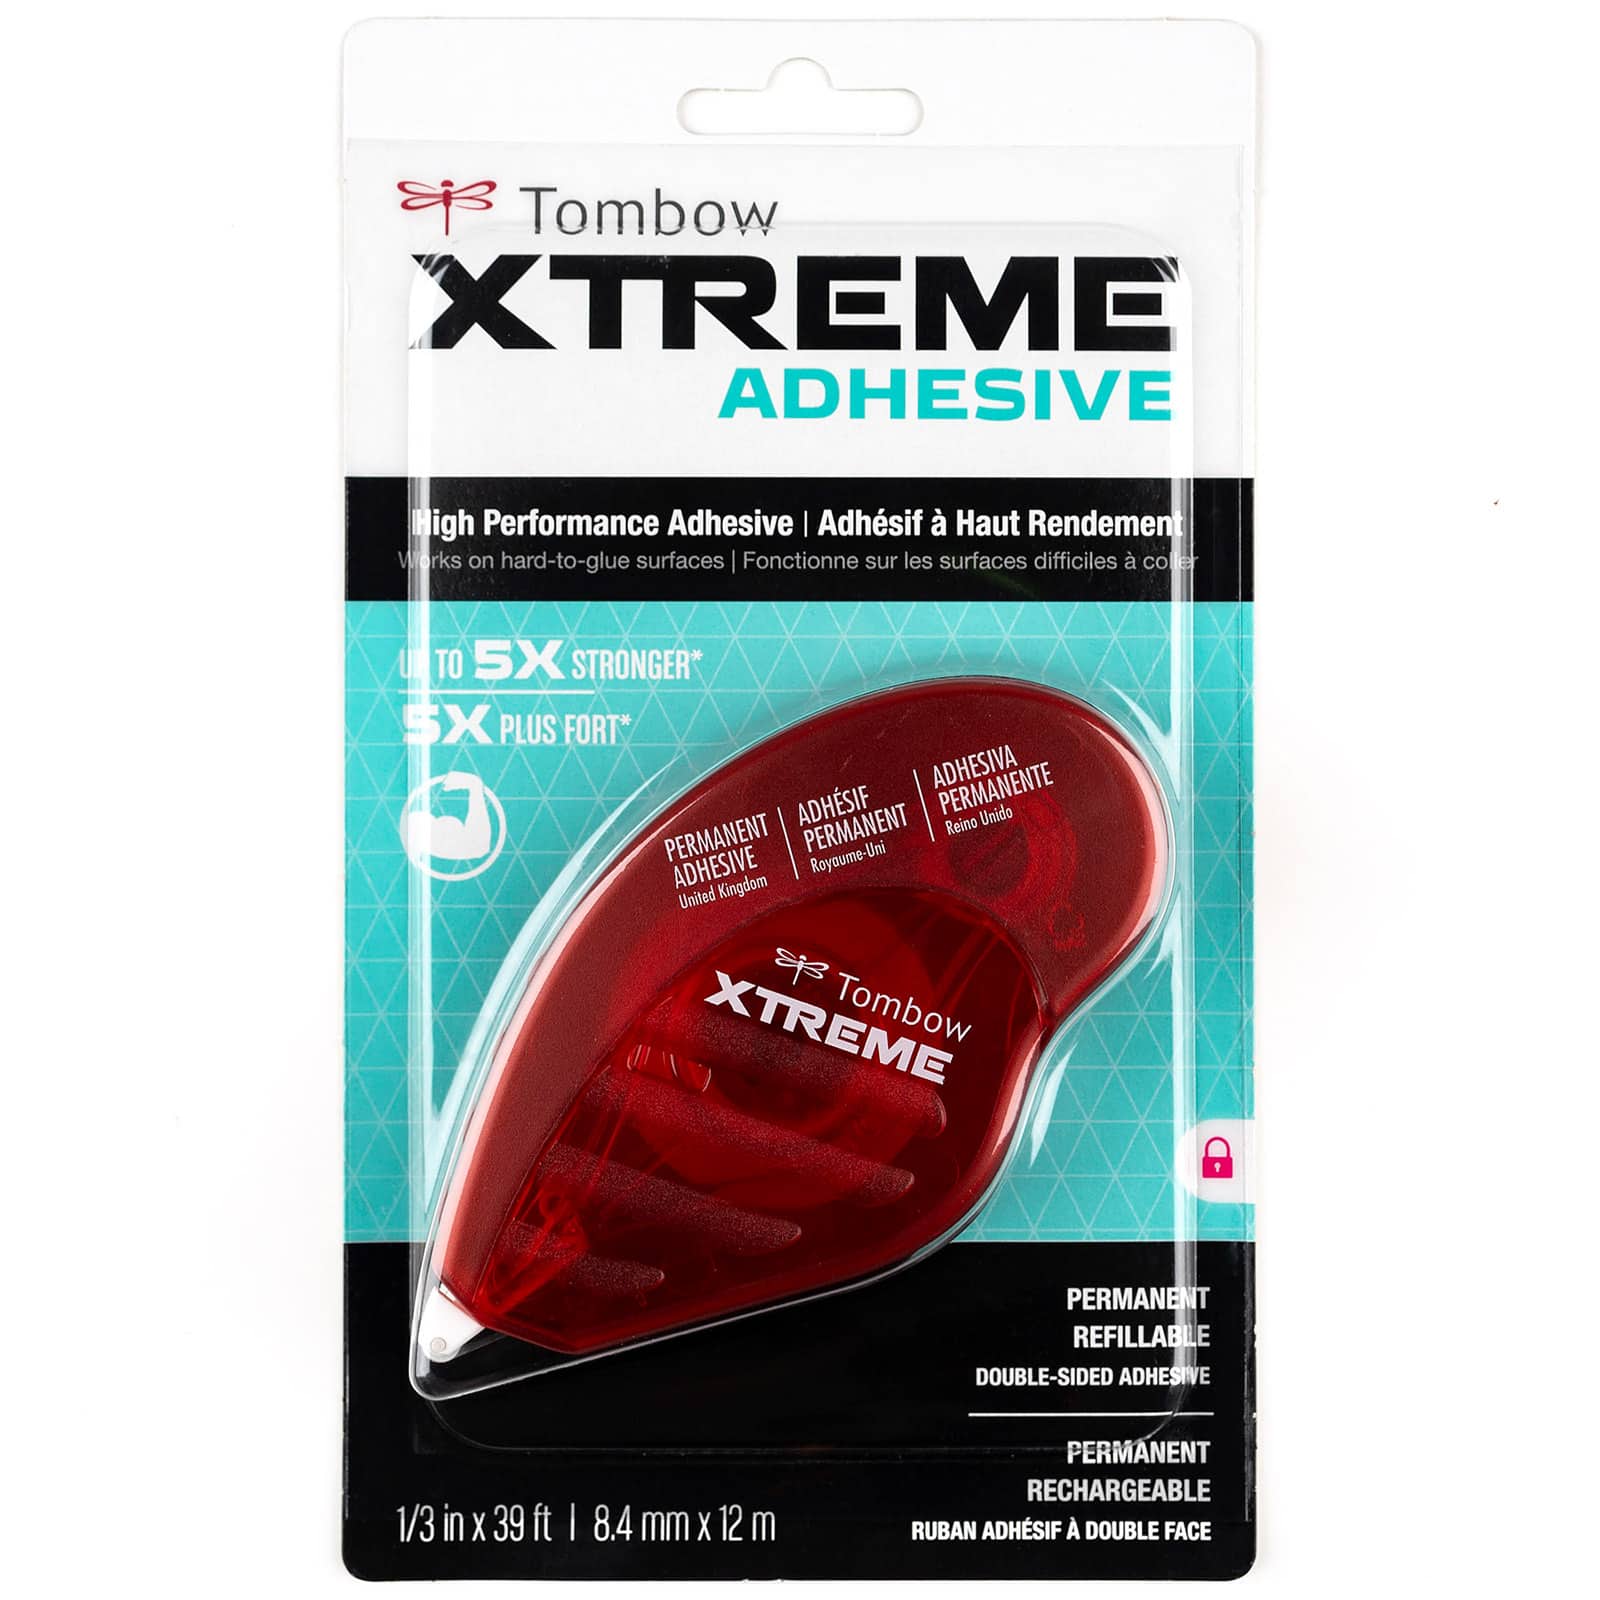 12 Pack: Tombow Xtreme Adhesive Runner